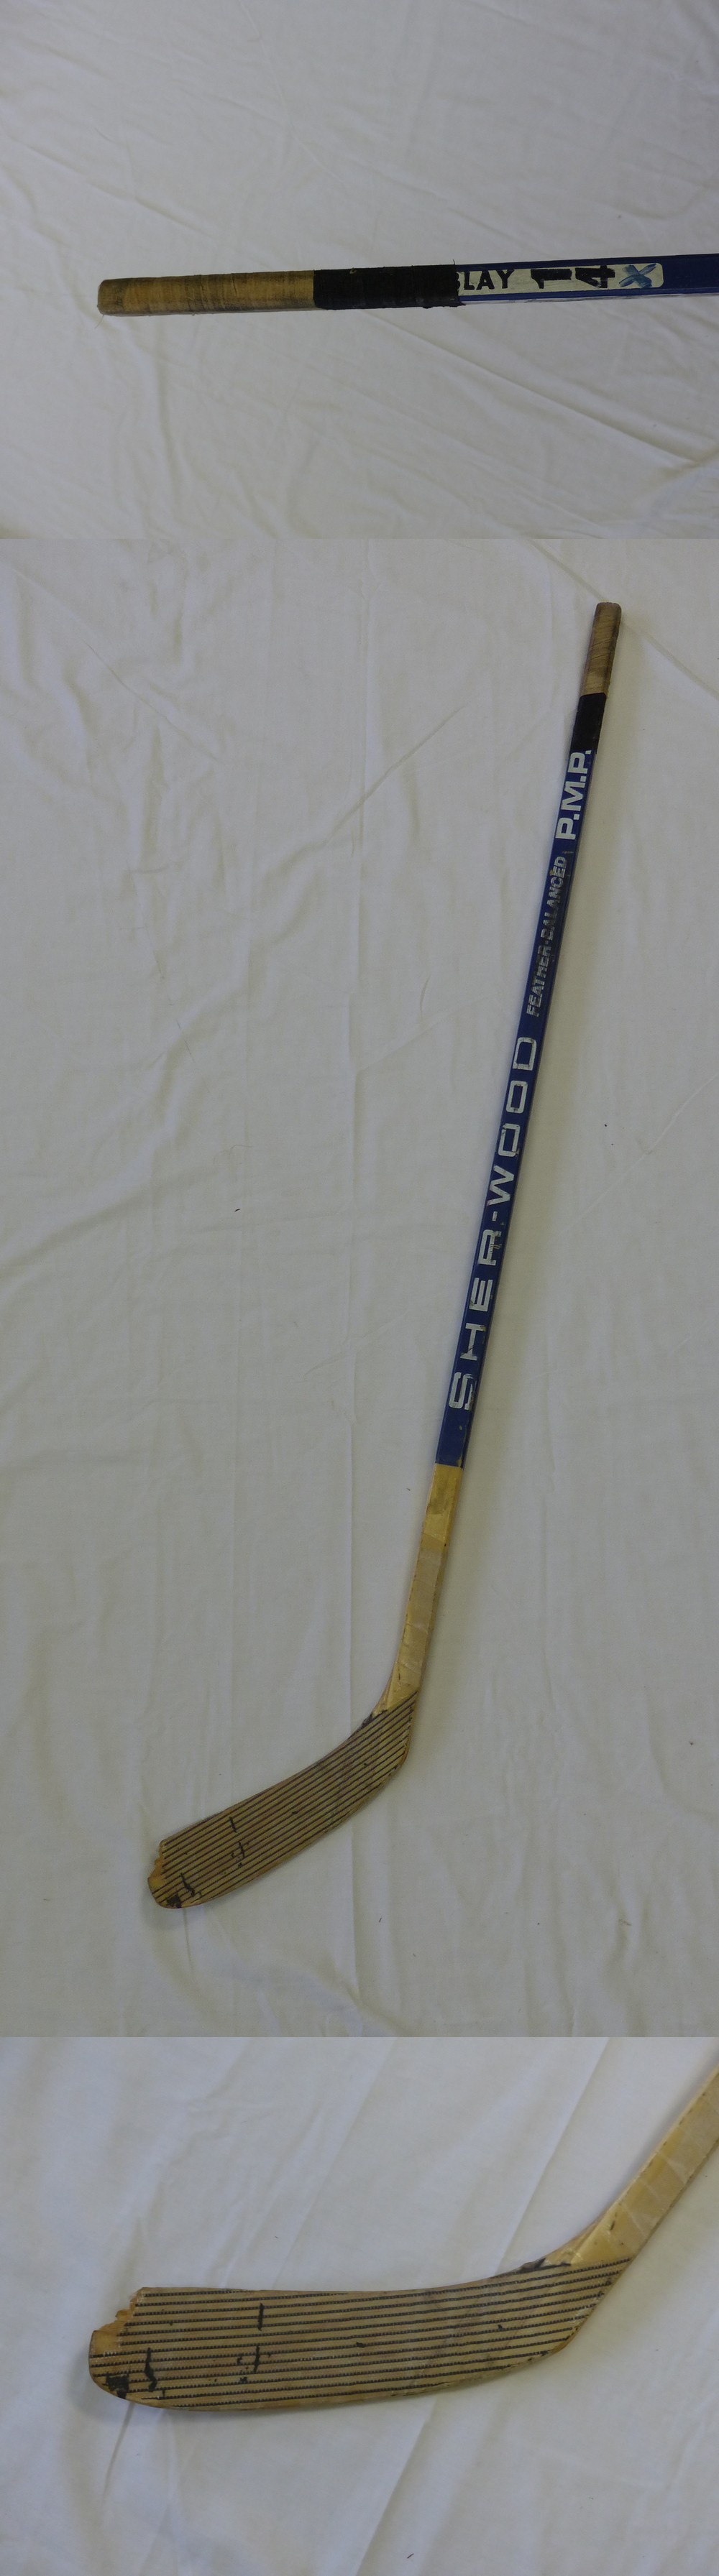 1986 MONTREAL CANADIENS M. TREMBLAY STANLEY CUP GAME USED STICK photo